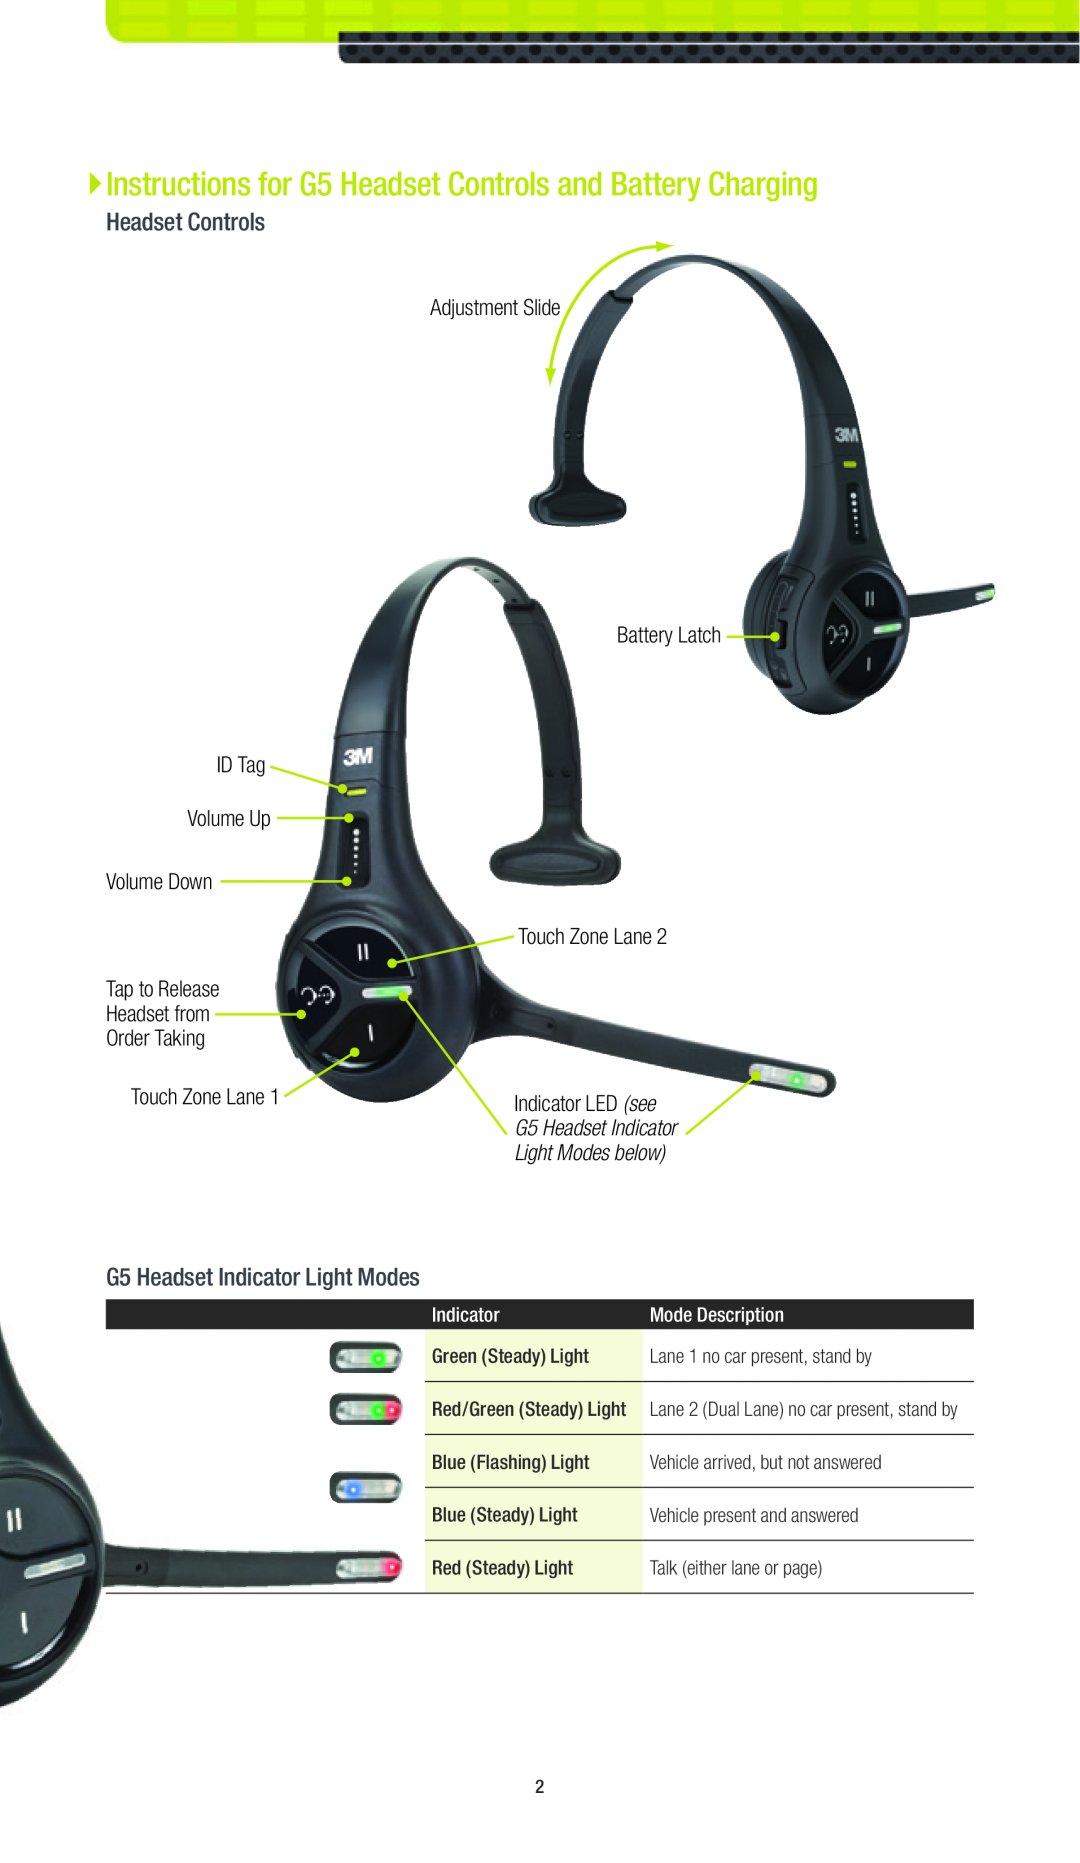 3M XT-1 Headset Controls, G5 Headset Indicator Light Modes, ID Tag Volume Up Volume Down Tap to Release, Touch Zone Lane 